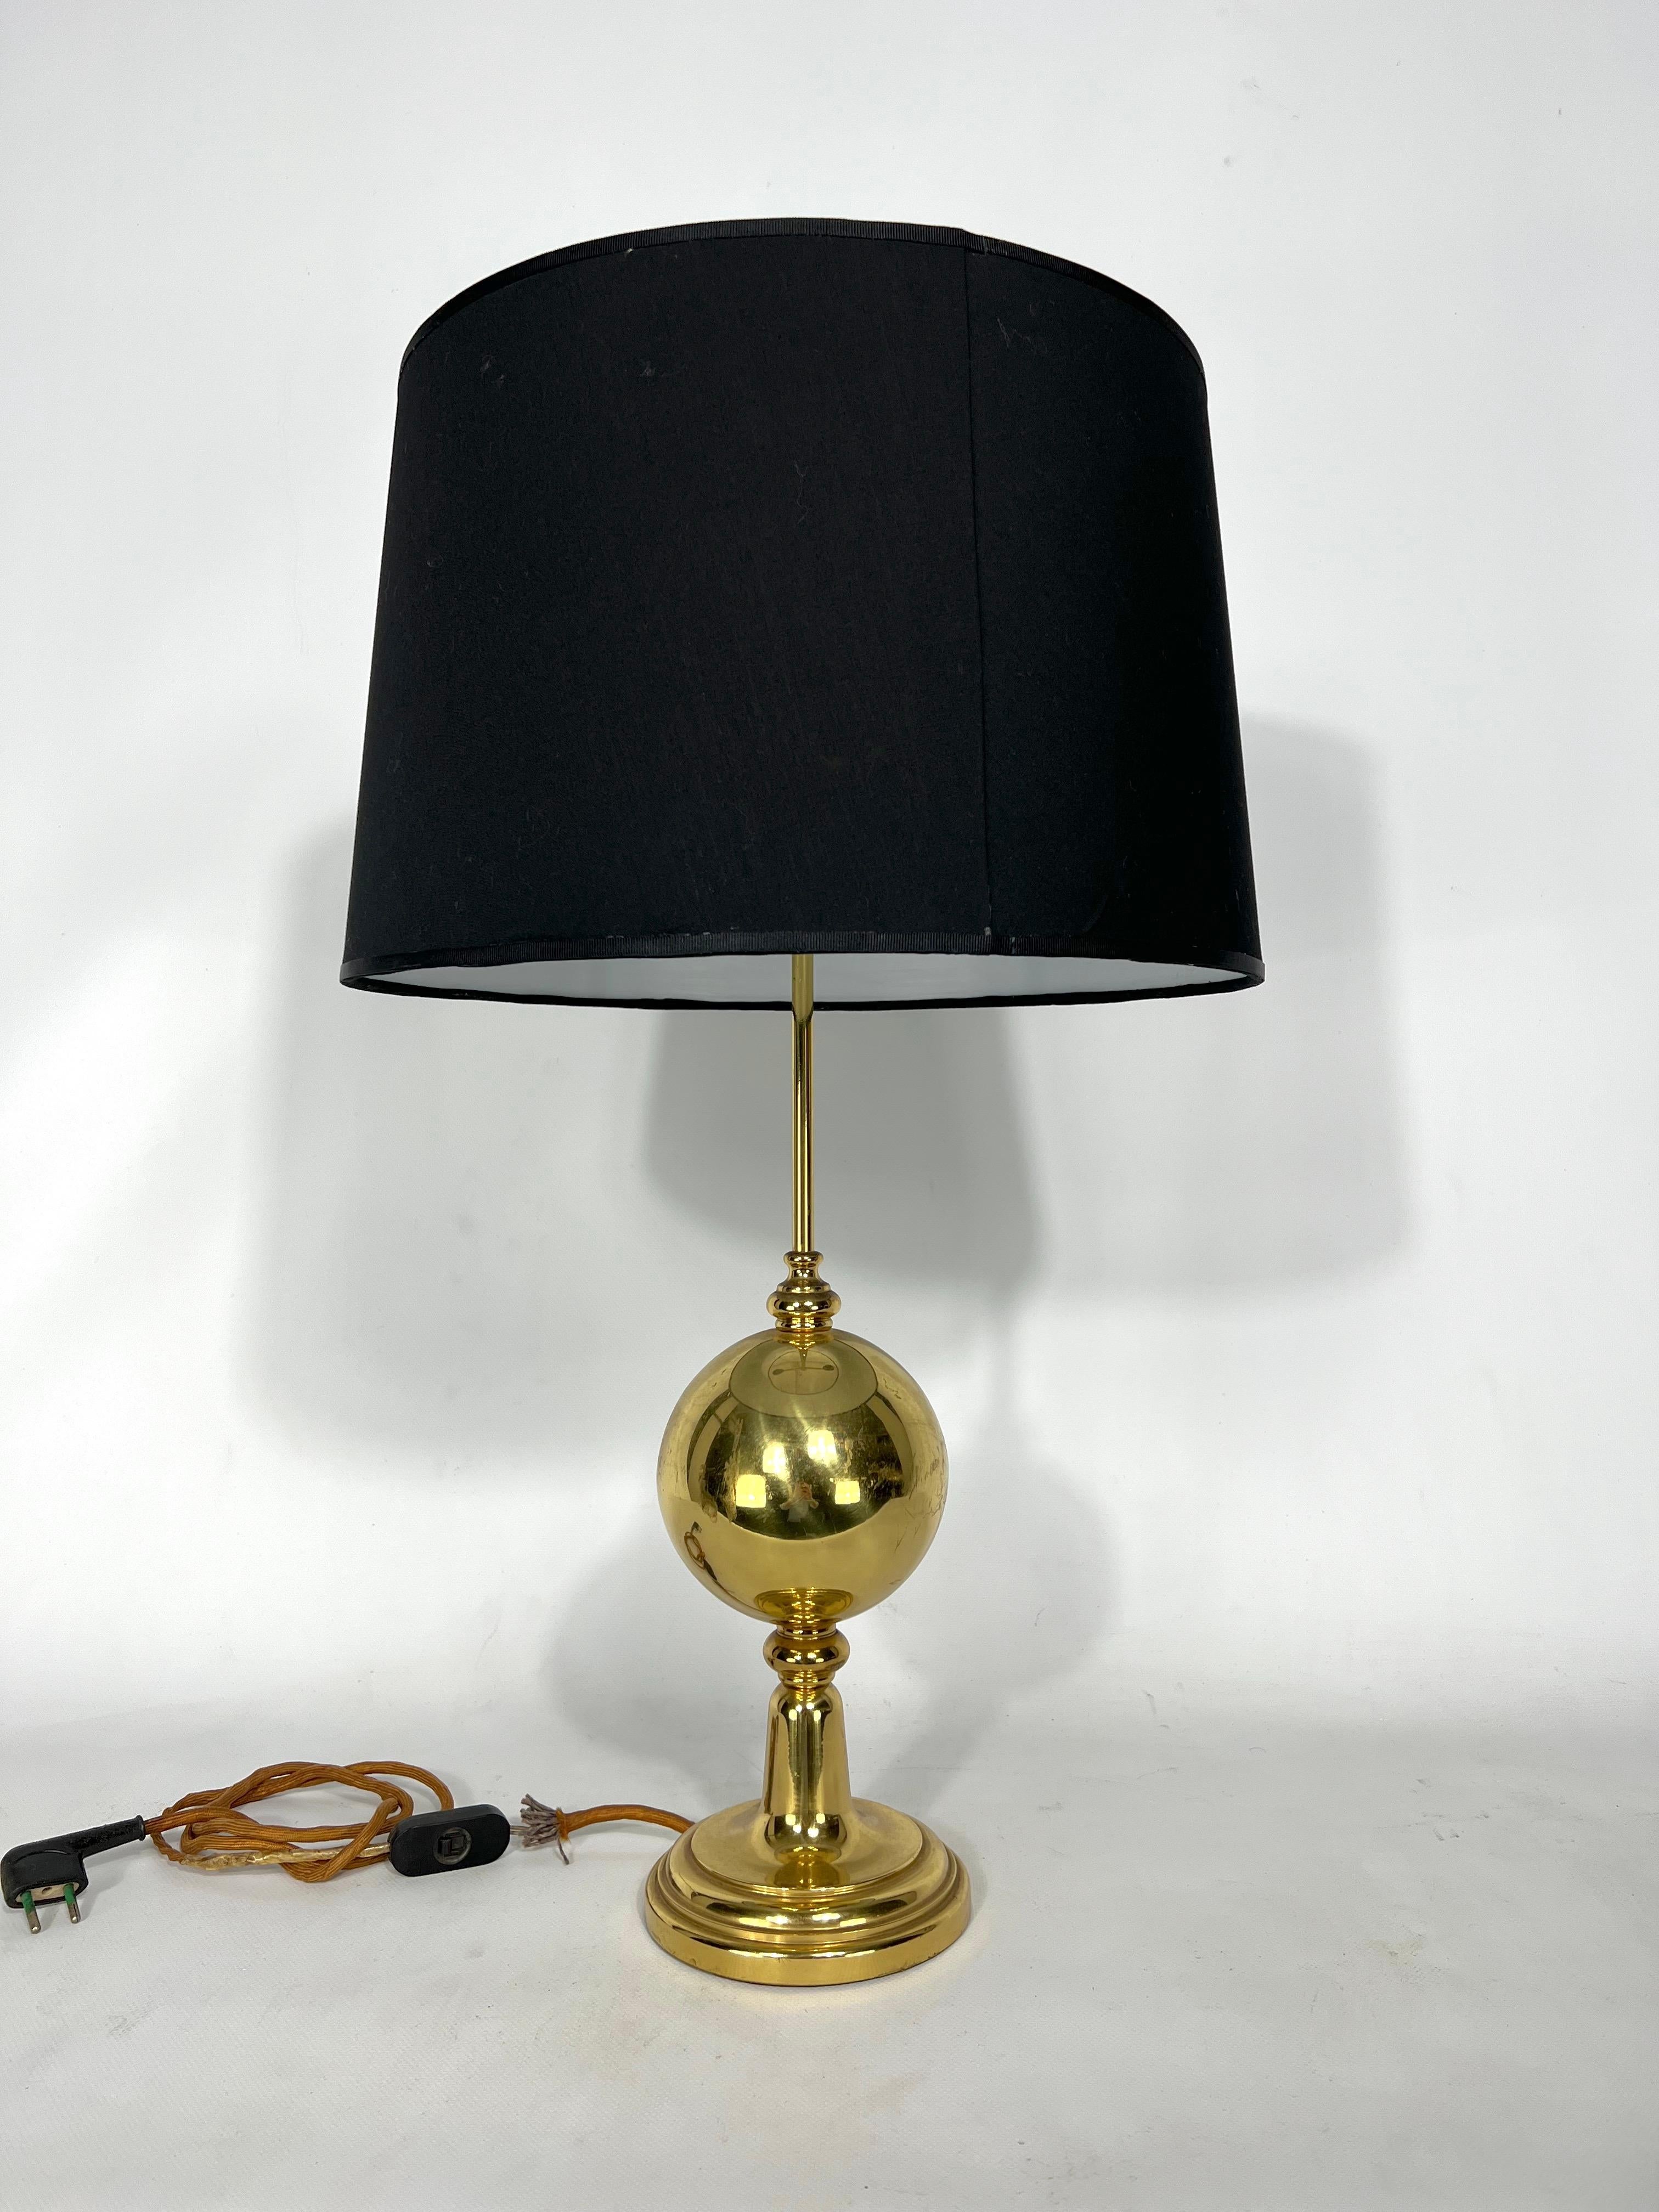 Good vintage condition with normal trace of age and use for this brass table lamp produced in Italy during the 50s. It mounts two sockets for E14 lamps. Full working with EU standard, adaptable on demand for USA standard.